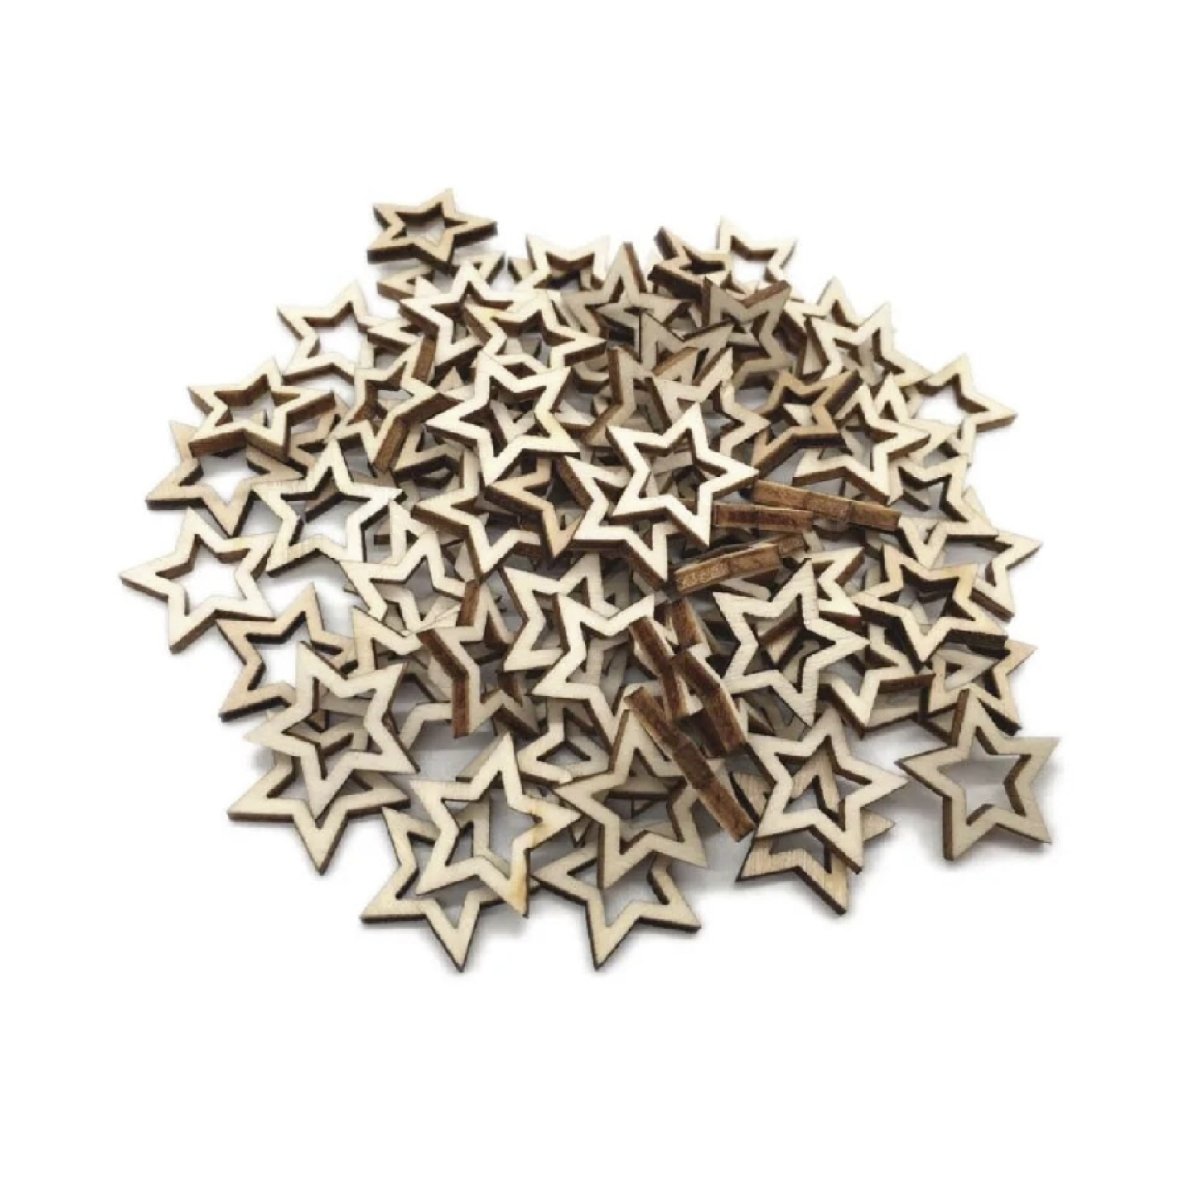 100pcs Wooden Stars Confetti 10-30mm Wood Crafts Decorations Centre-Removed - 20mm Only - - Asia Sell